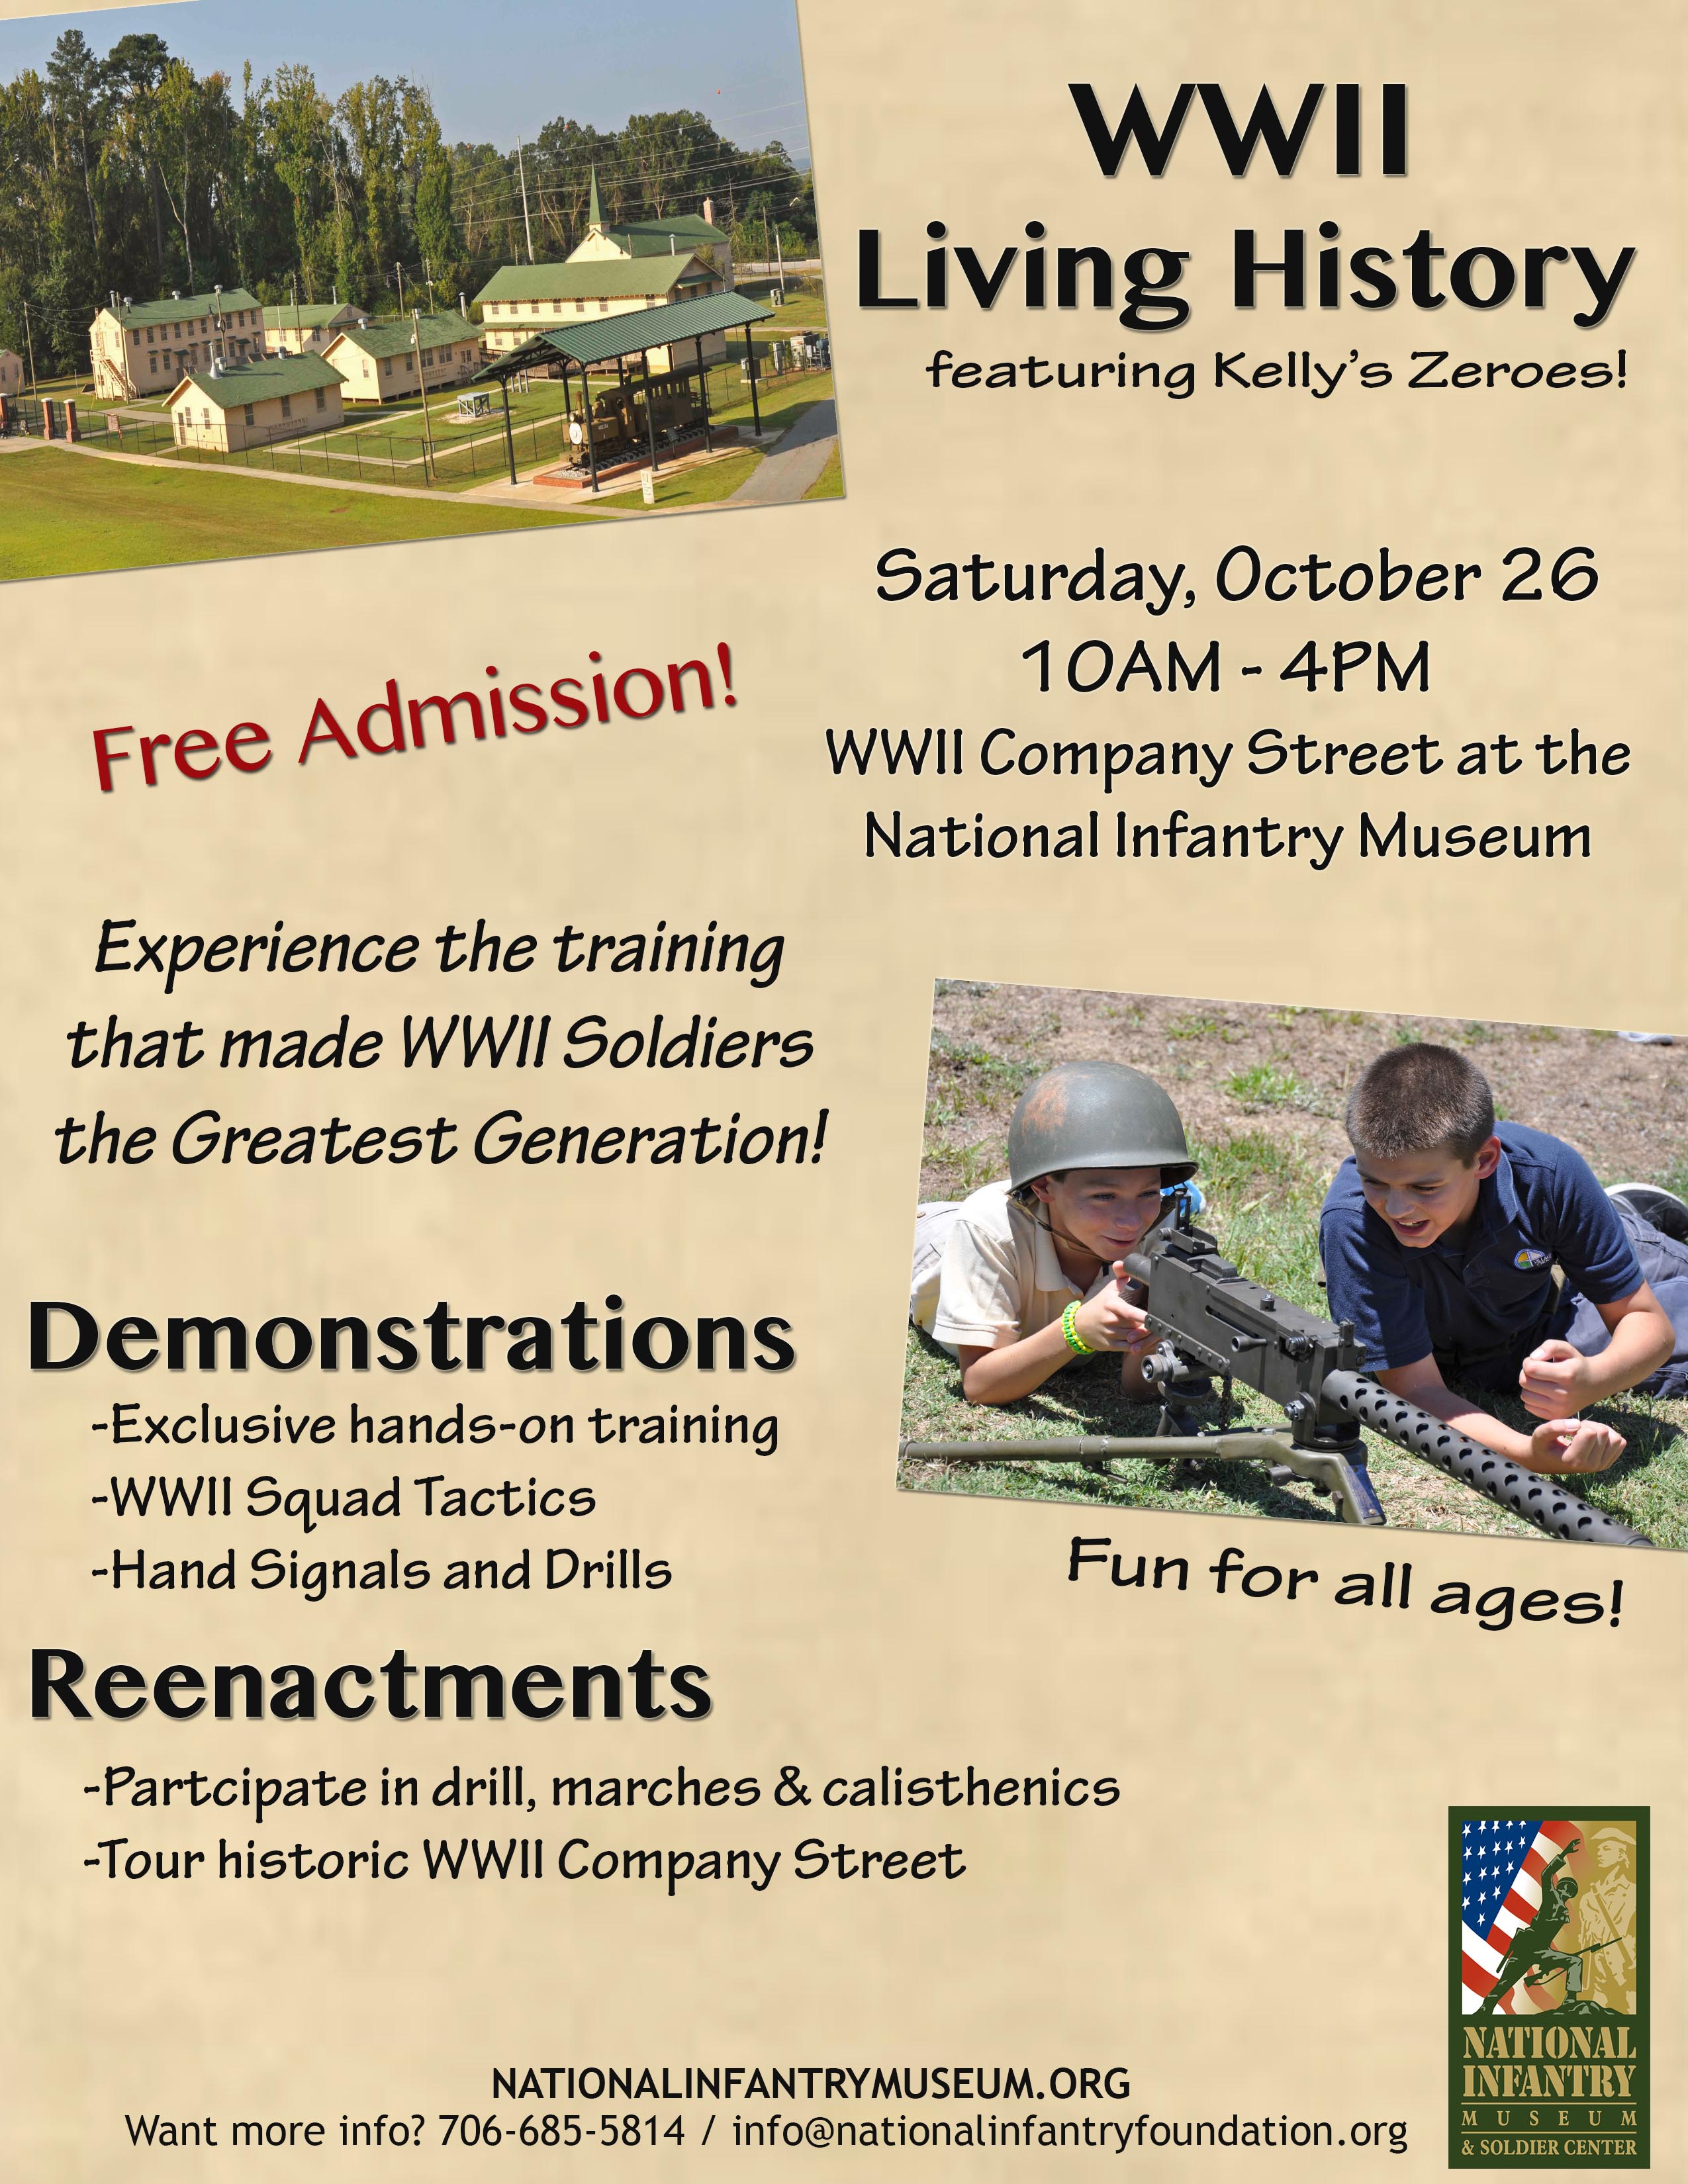 WWII Living History Event at the National Infantry Museum